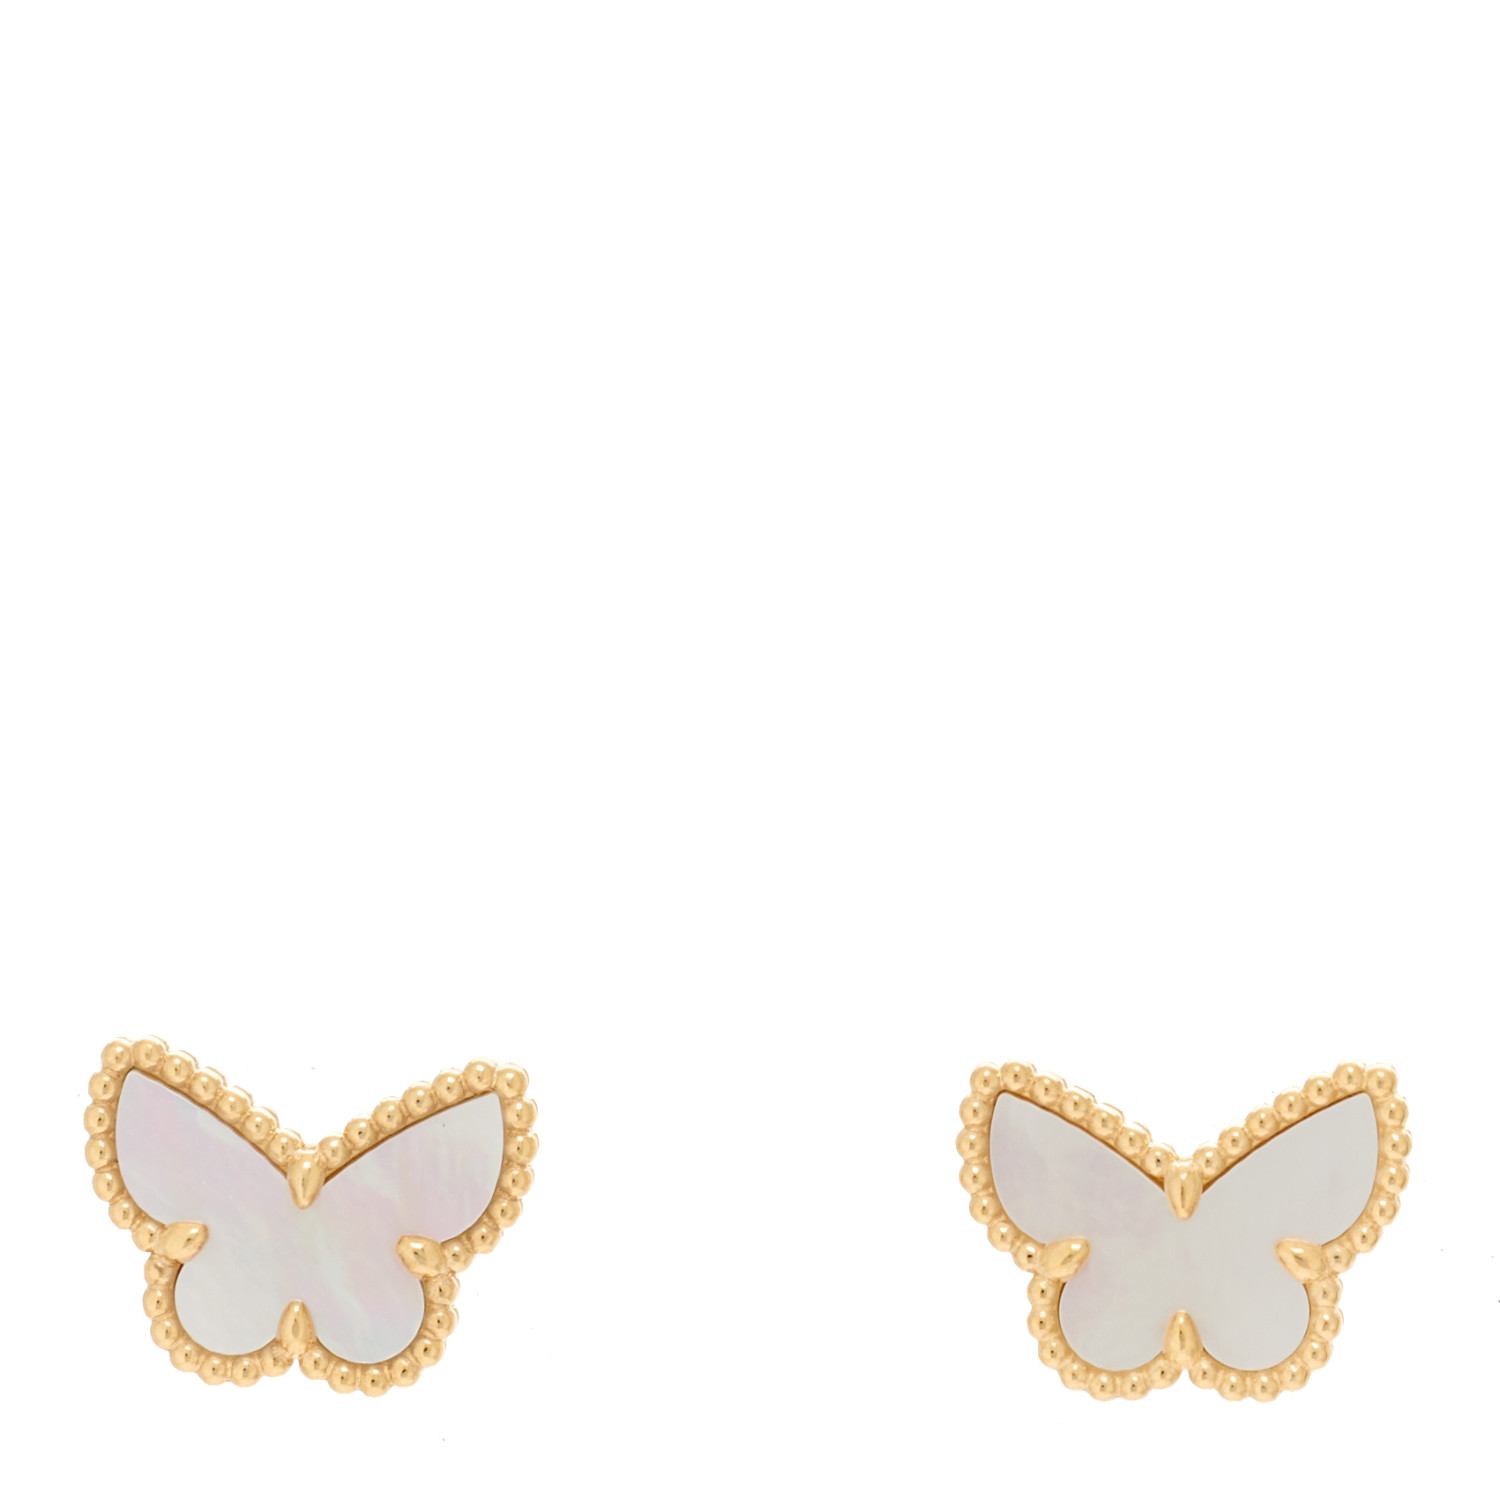 VAN CLEEF & ARPELS 18K Yellow Gold Mother of Pearl Sweet Alhambra Butterfly Earrings by FASHIONPHILE